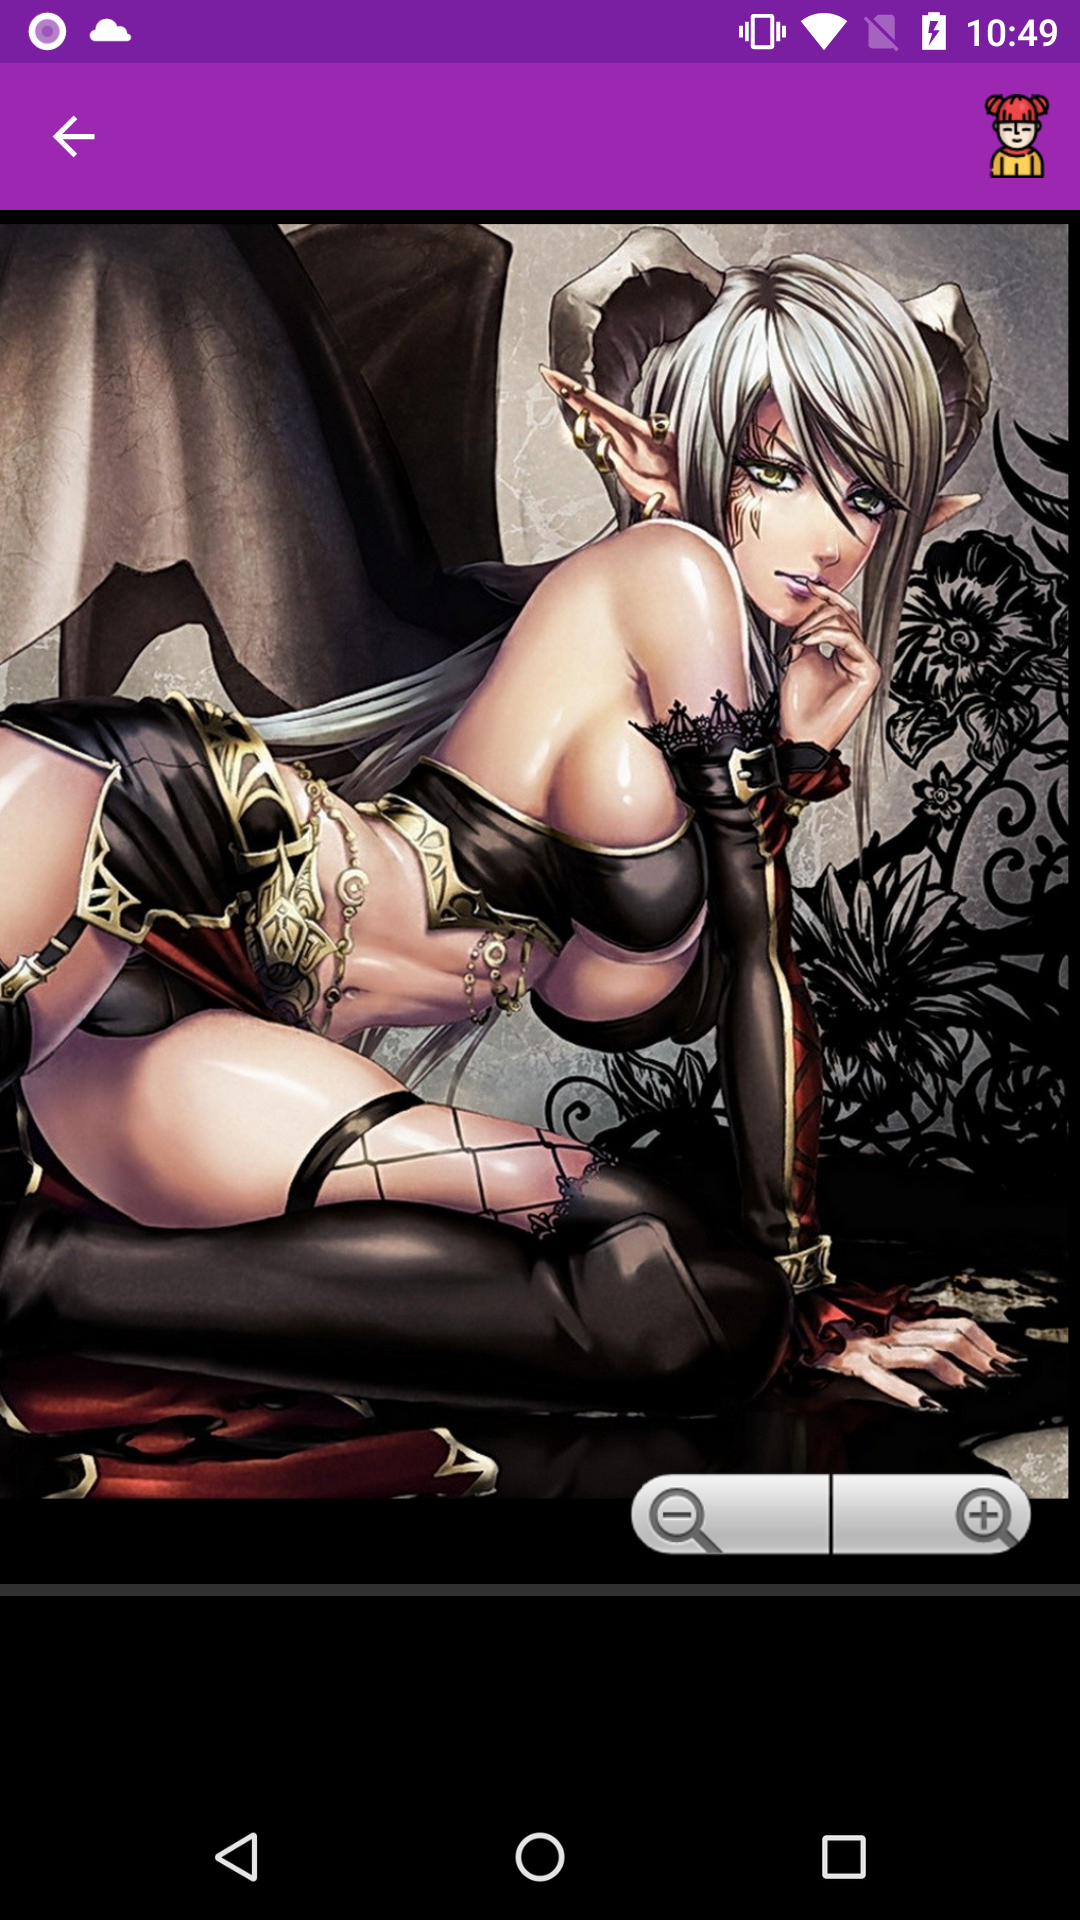 Fantasy Girls wallpapers watching,backgrounds,ios,pictures,galleries,art,apps,sexy,girls,hntai,manga,download,app,fantasy,for,porn,futanari,collections,best,wallpapers,hentai,android,pics,picture,apk